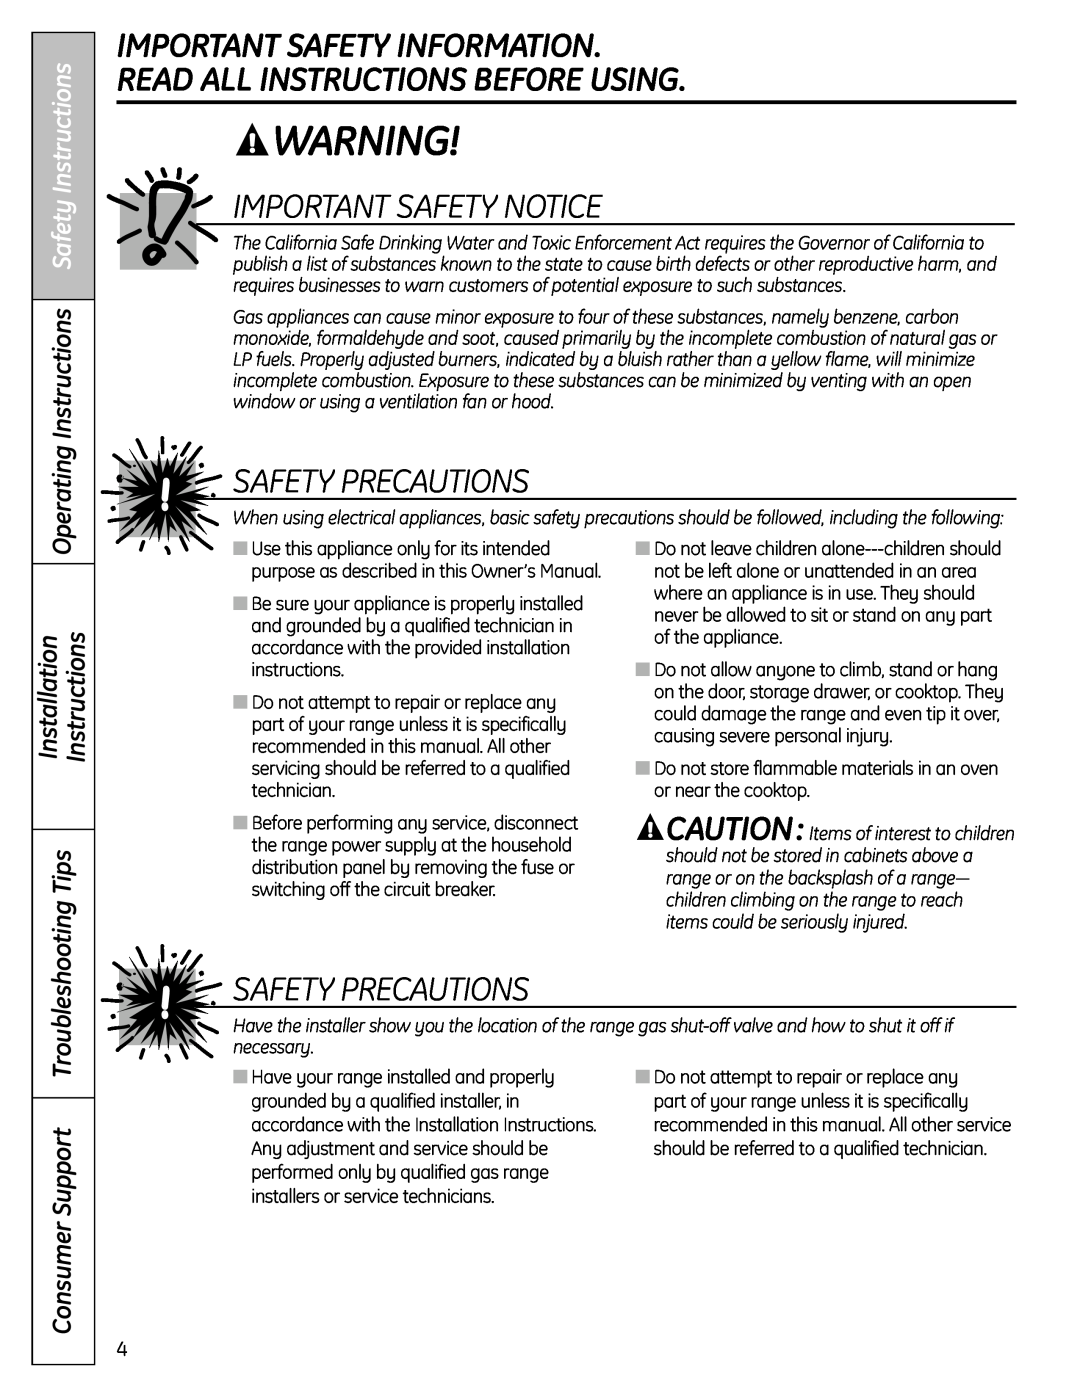 GE P2B918 Important Safety Information Read All Instructions Before Using, Important Safety Notice, Safety Precautions 